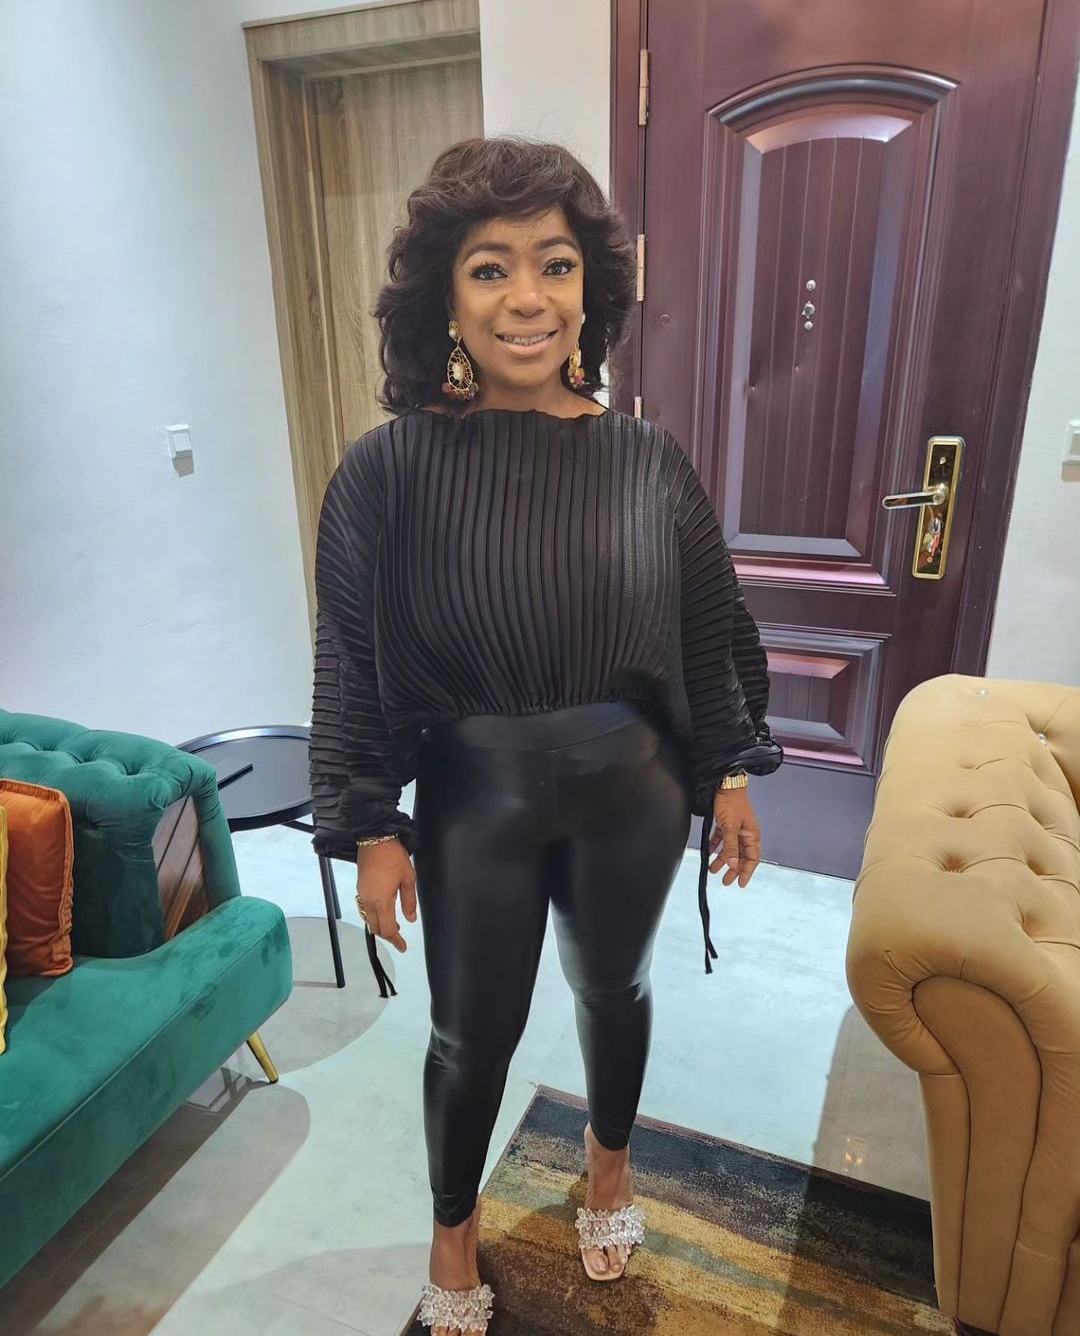 "At 50, Without a Child or Husband": Netizen Criticizes Bimbo Akintola, Biola Adebayo Responds Amidst Being Involved in the Controversy.